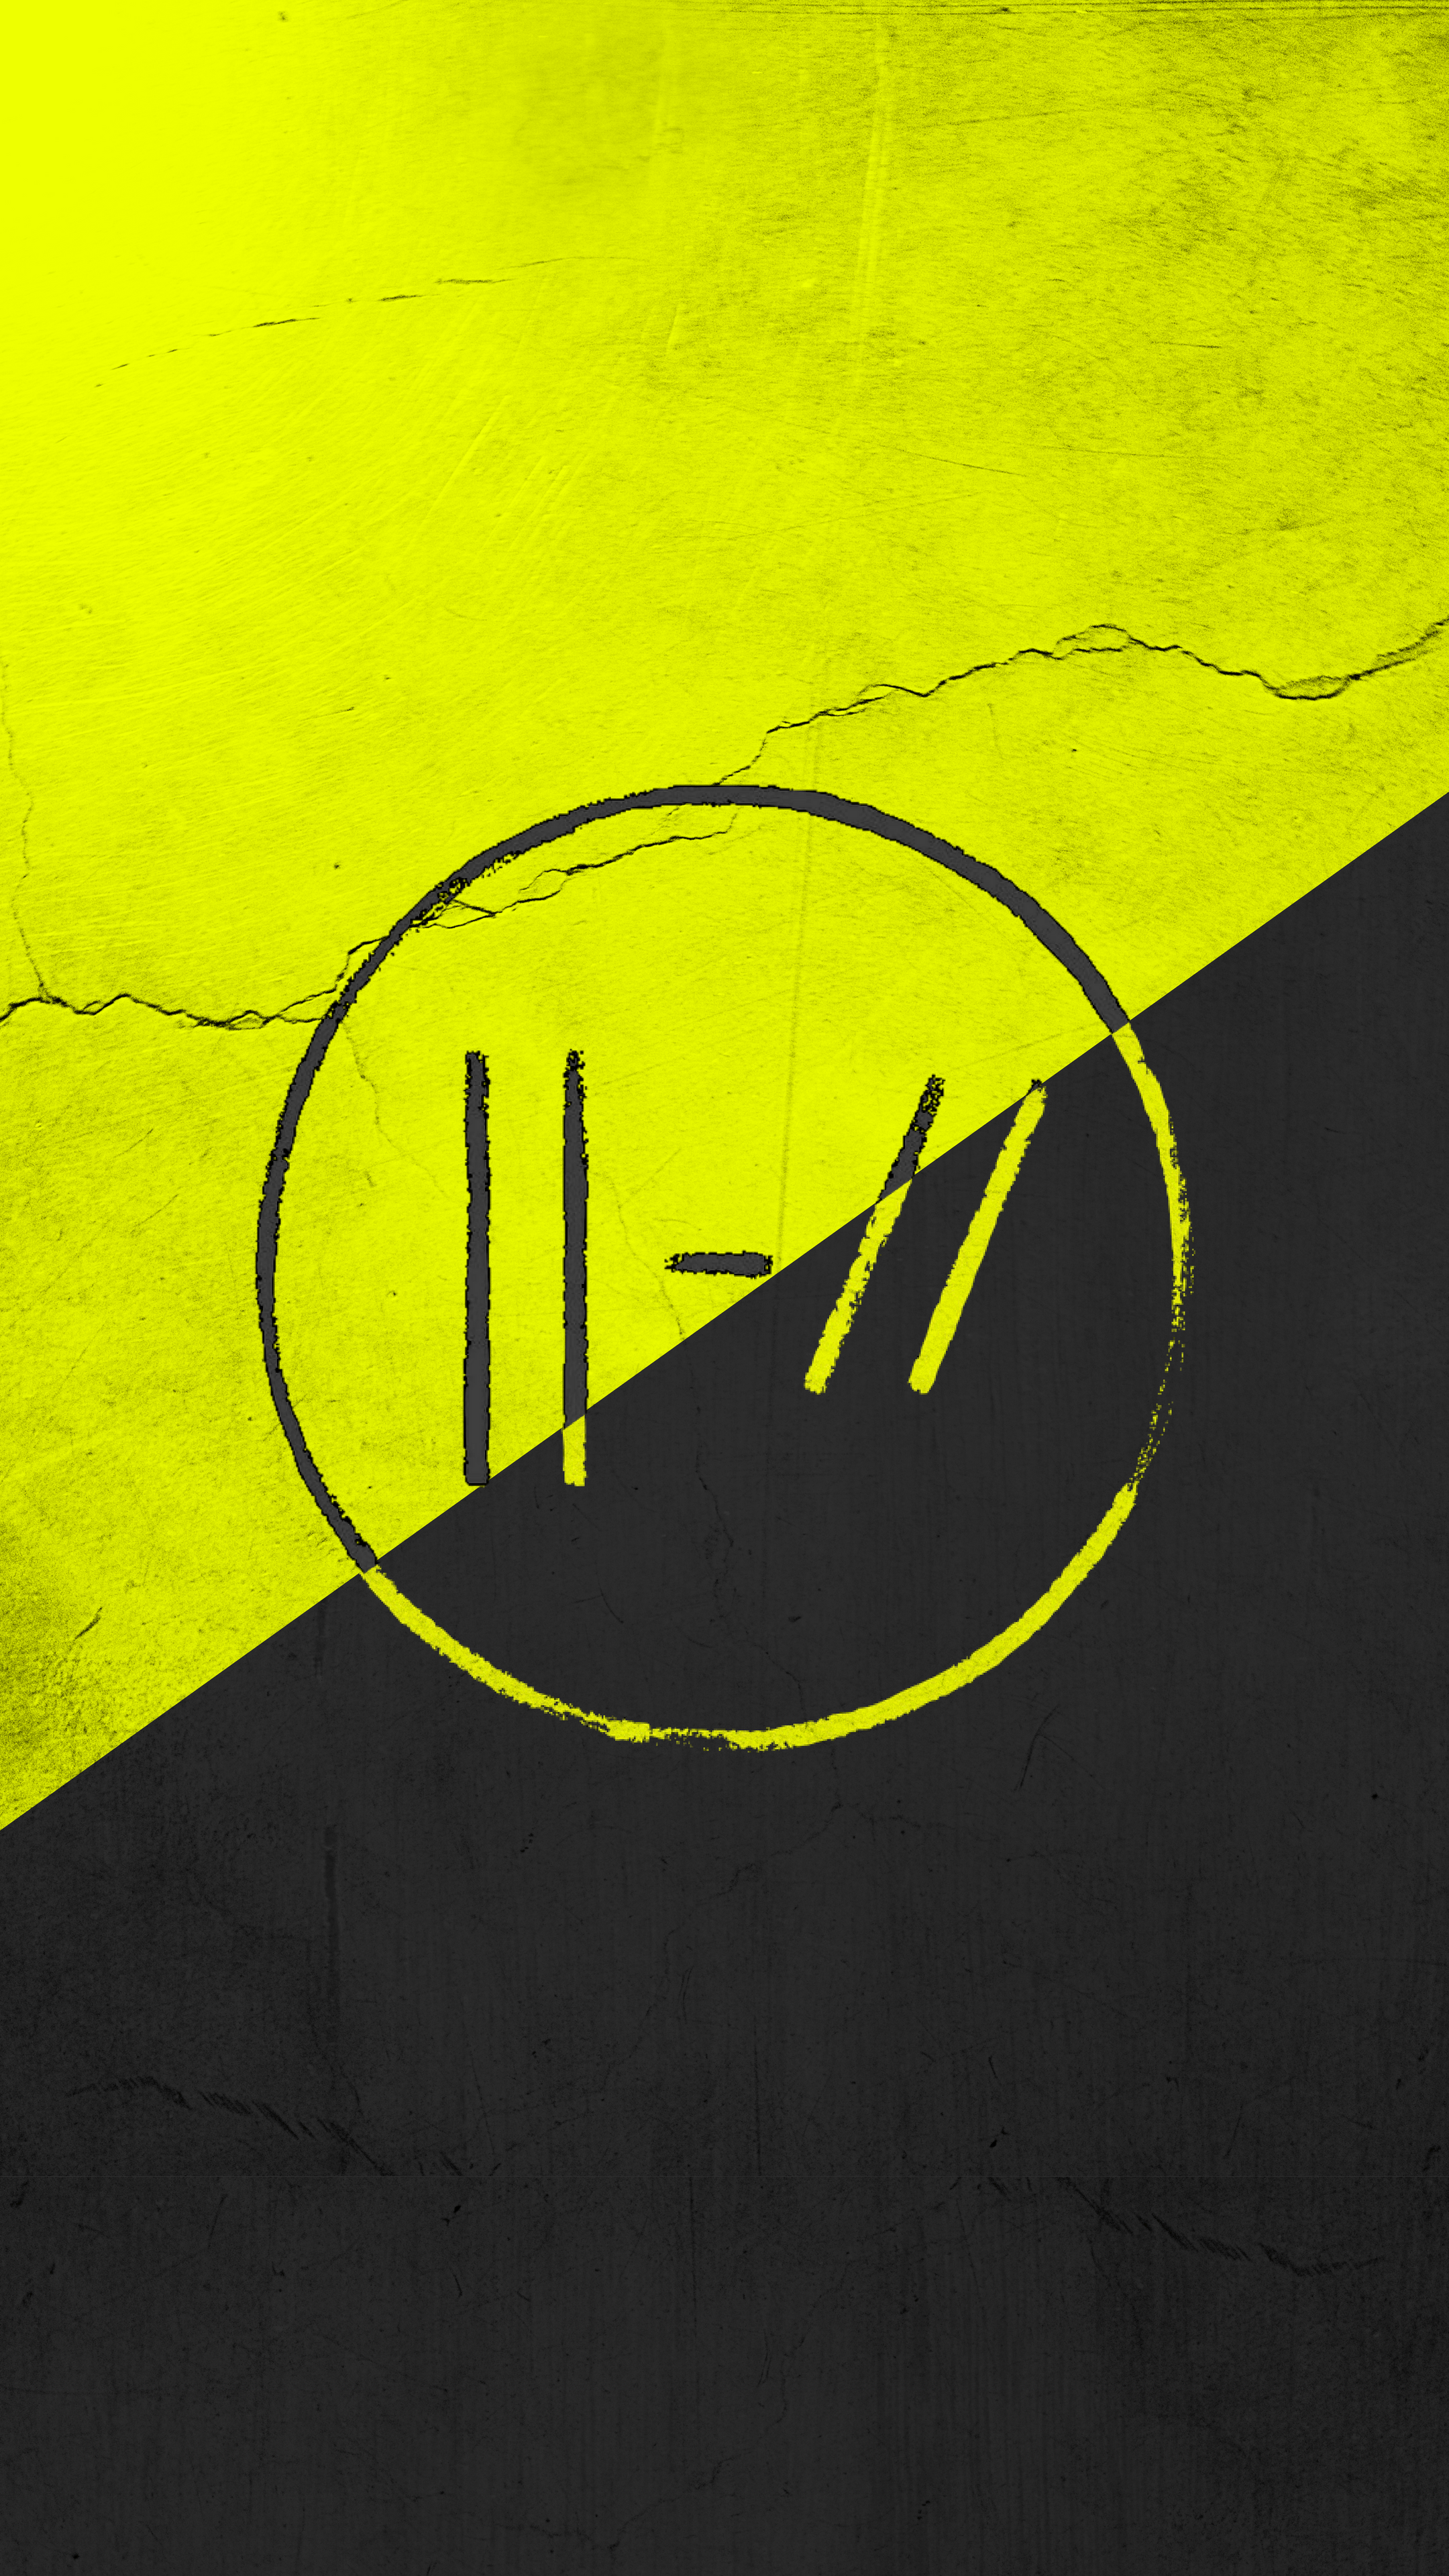 Twenty One Pilots Trench Wallpapers Top Free Twenty One Pilots Images, Photos, Reviews